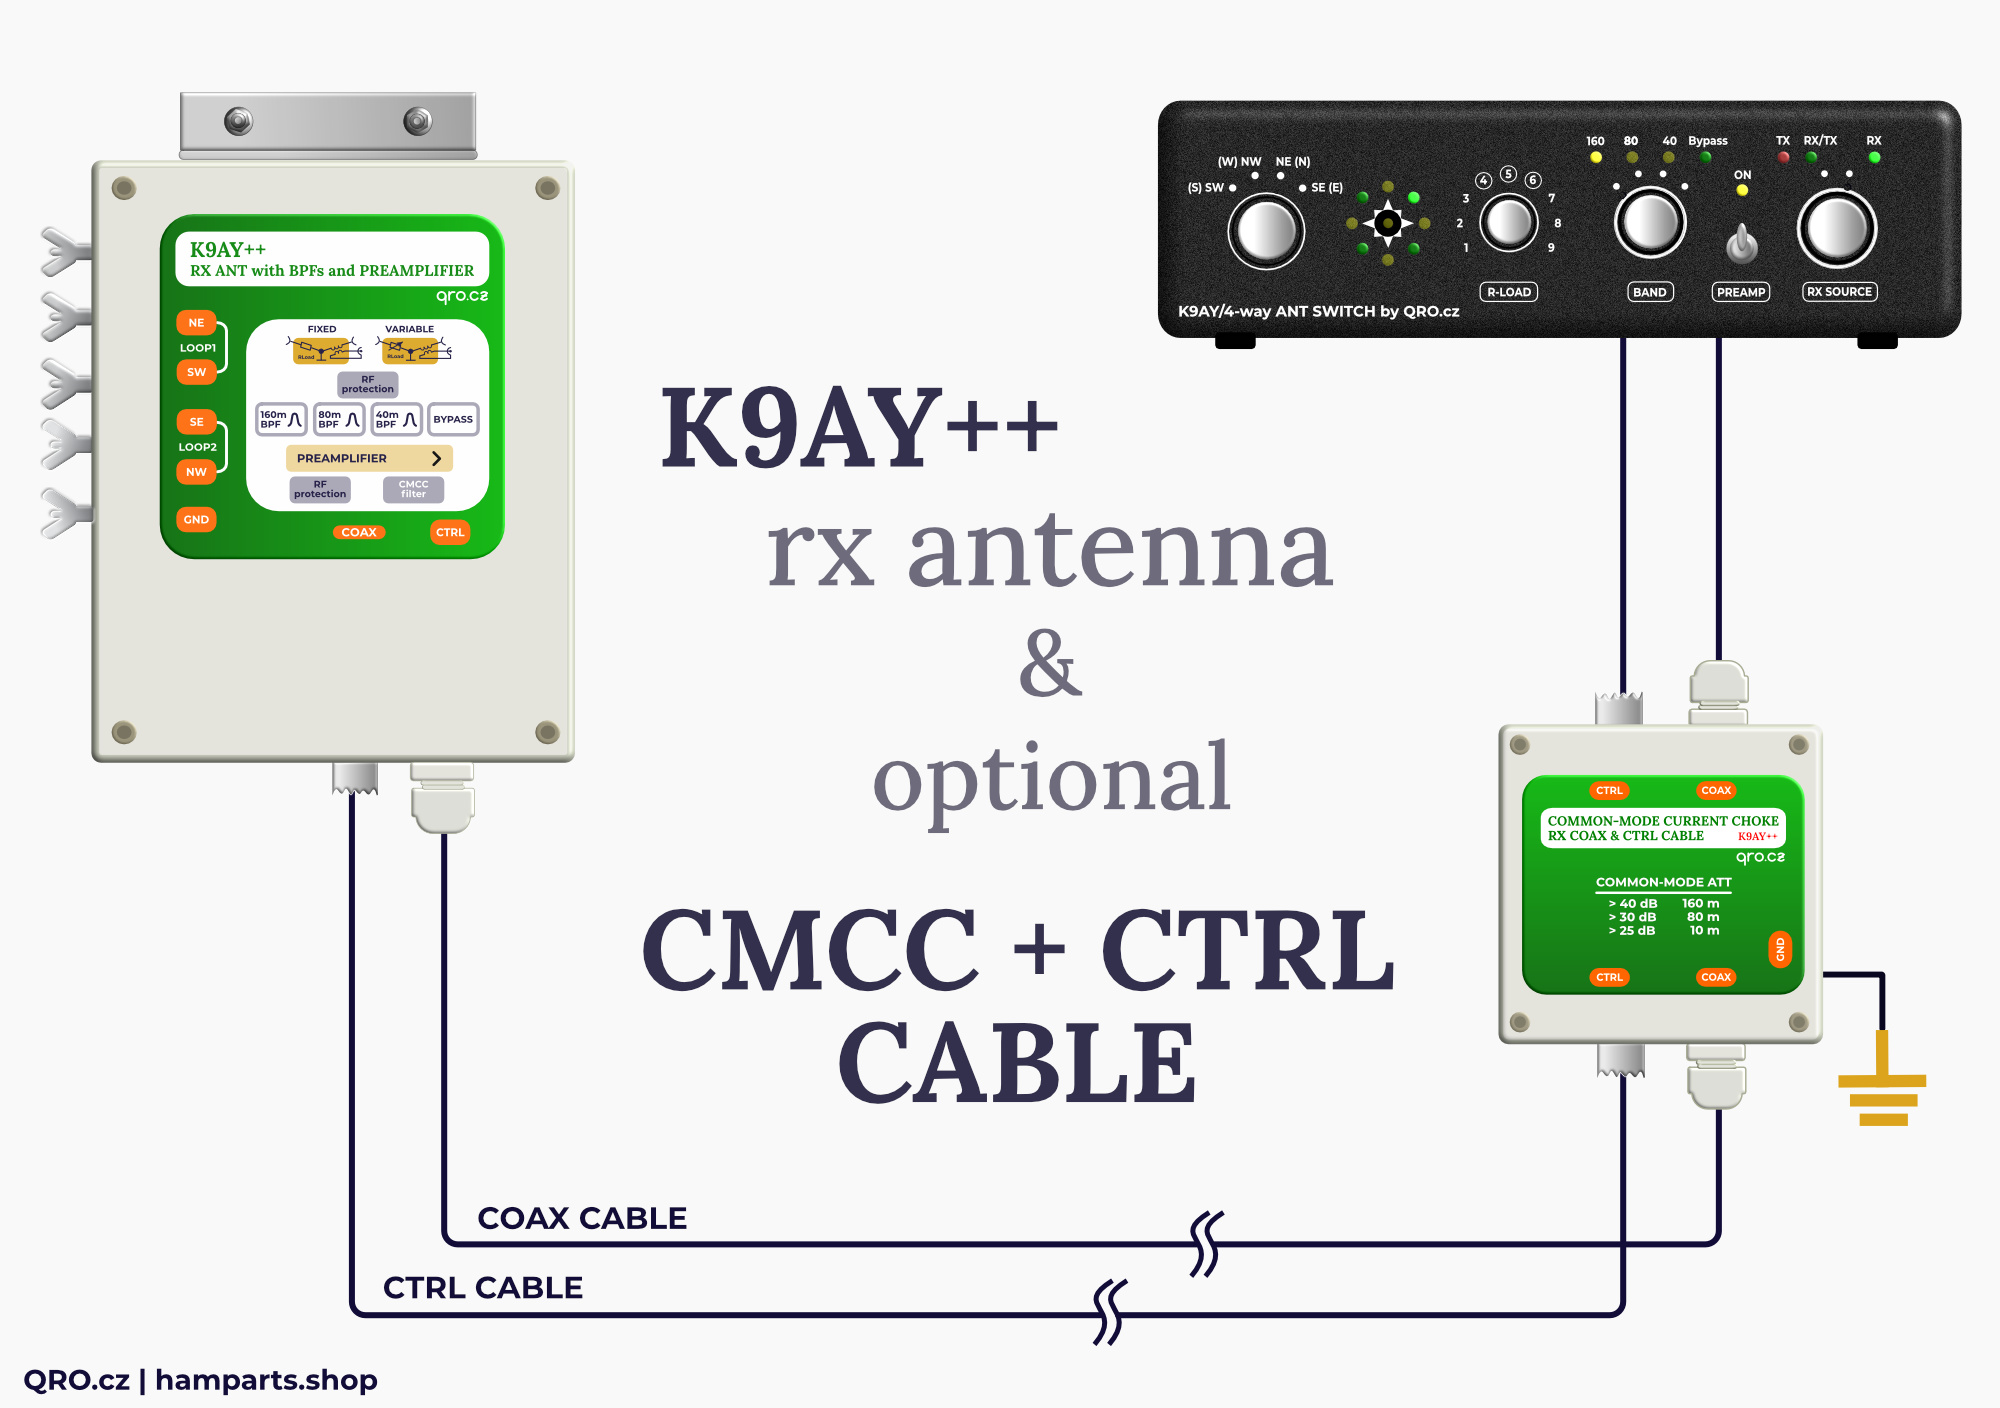 k9ay++ rx antenna with common-mode current choke by qro.cz hamparts.shop